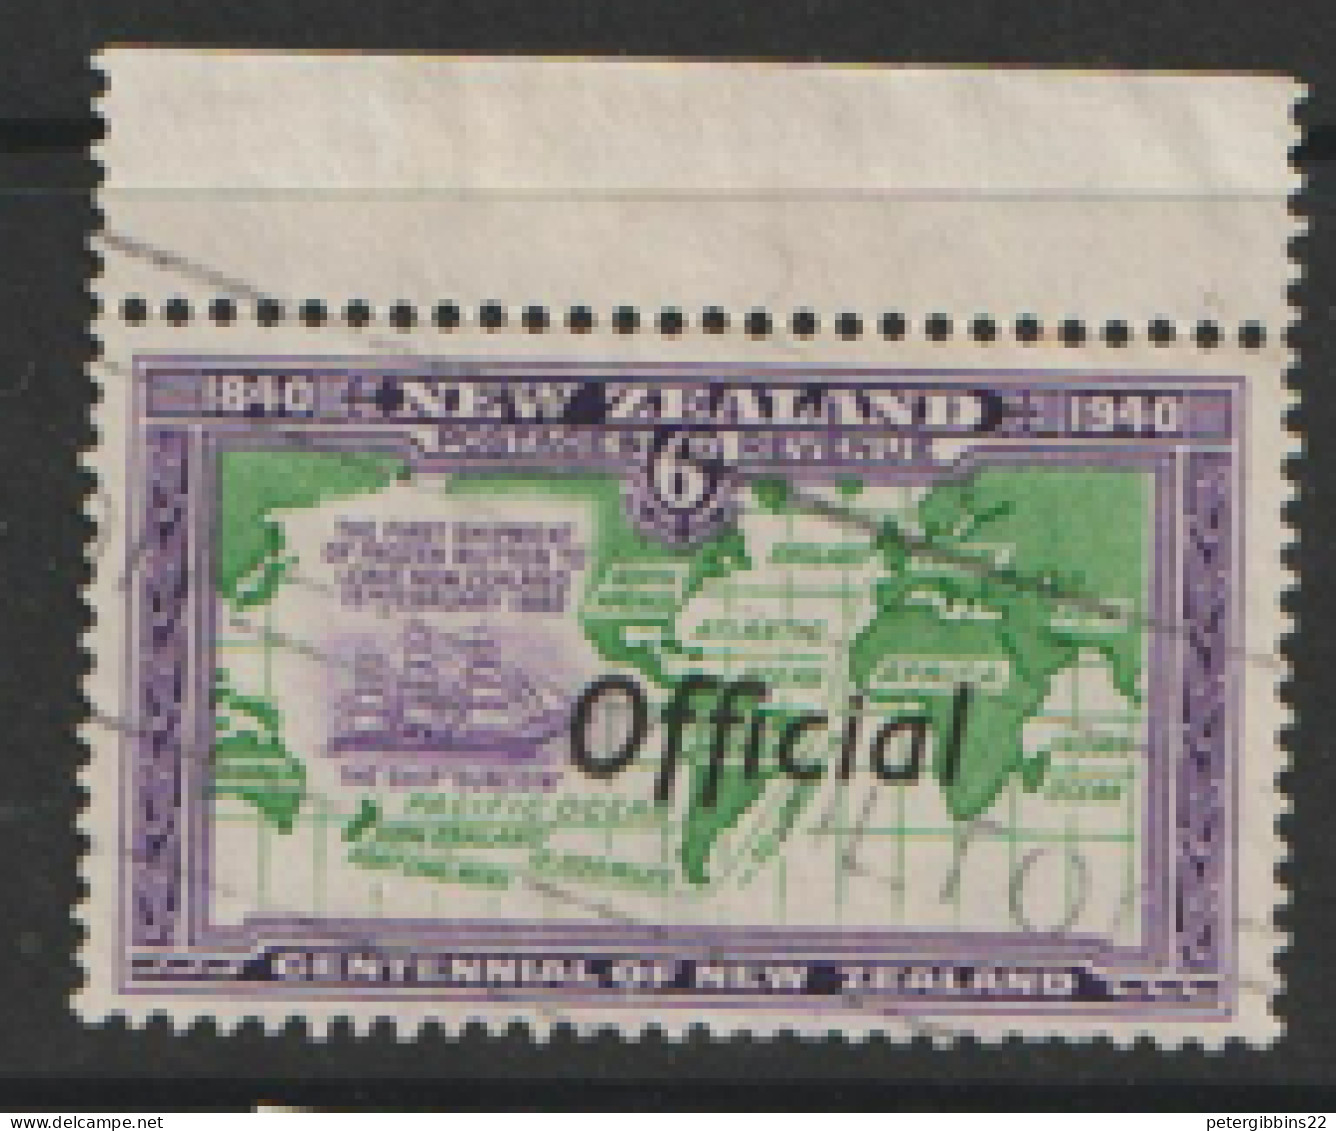 New  Zealand  1940  SG 0148  Cemtennial  Overprinted OFFICIAL Marginal  Fine Used  - Used Stamps